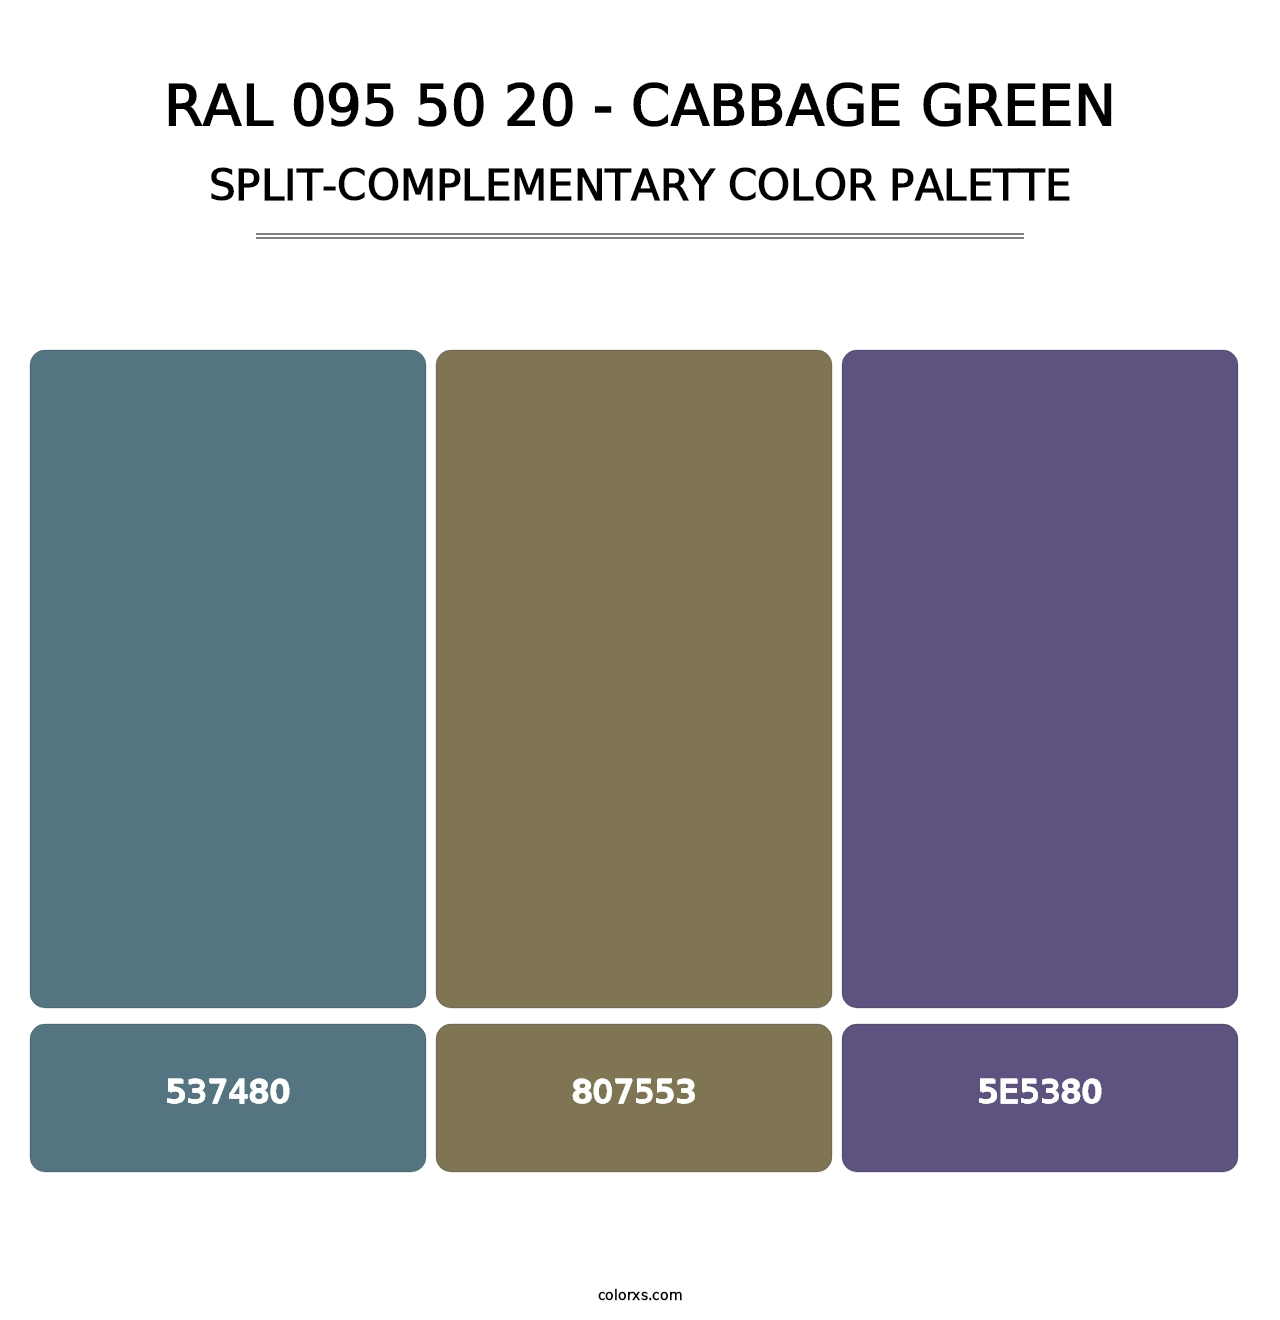 RAL 095 50 20 - Cabbage Green - Split-Complementary Color Palette